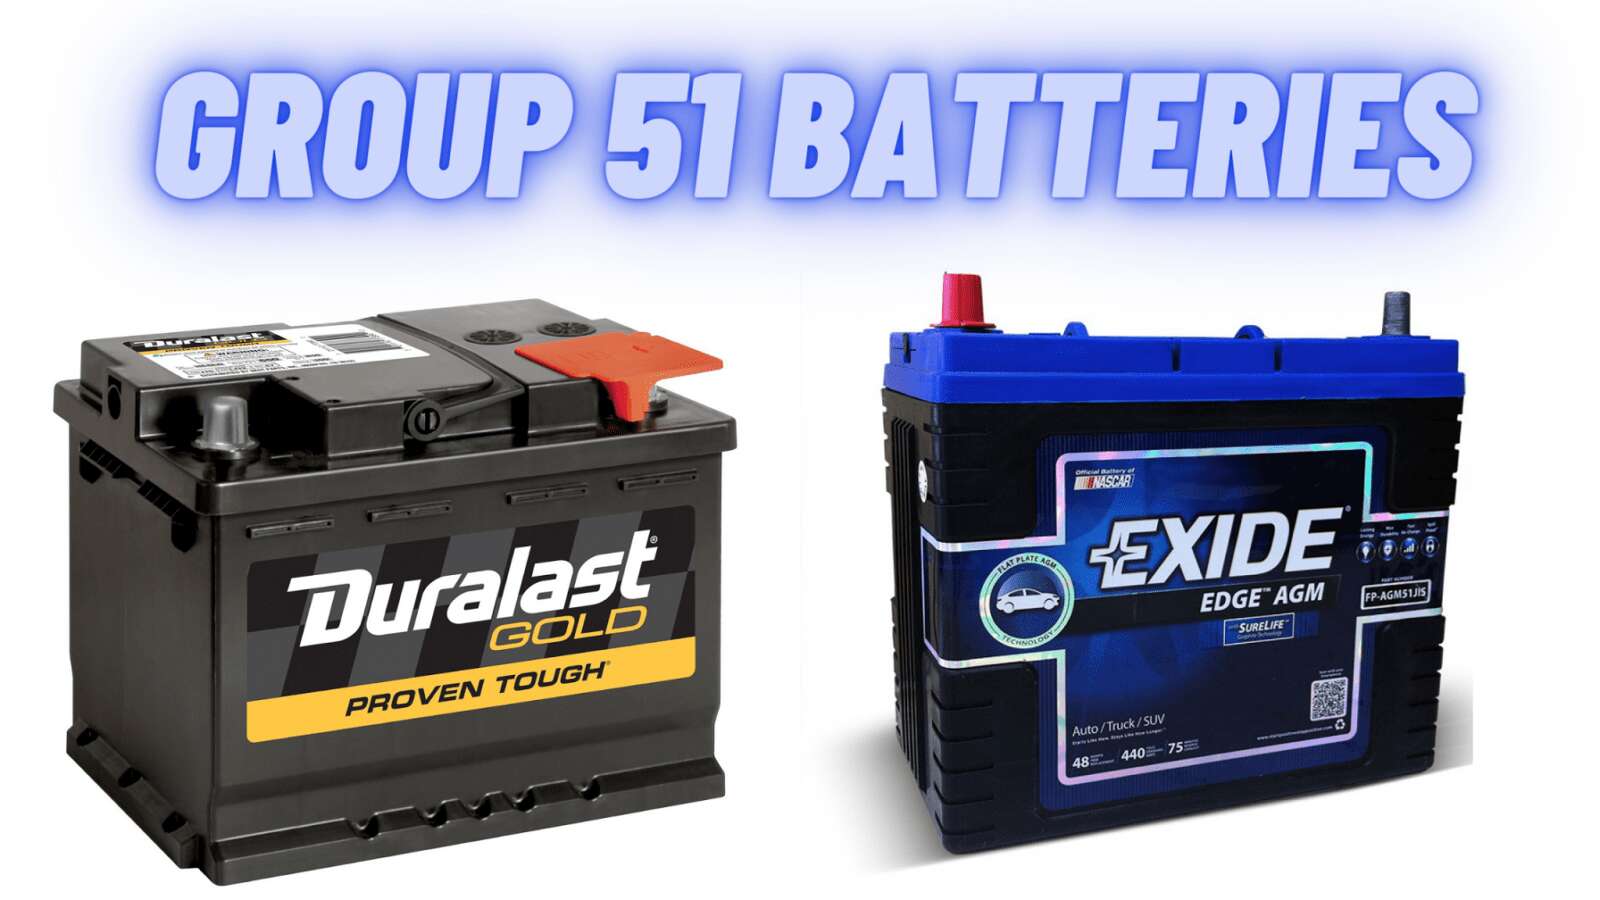 Group 51 battery